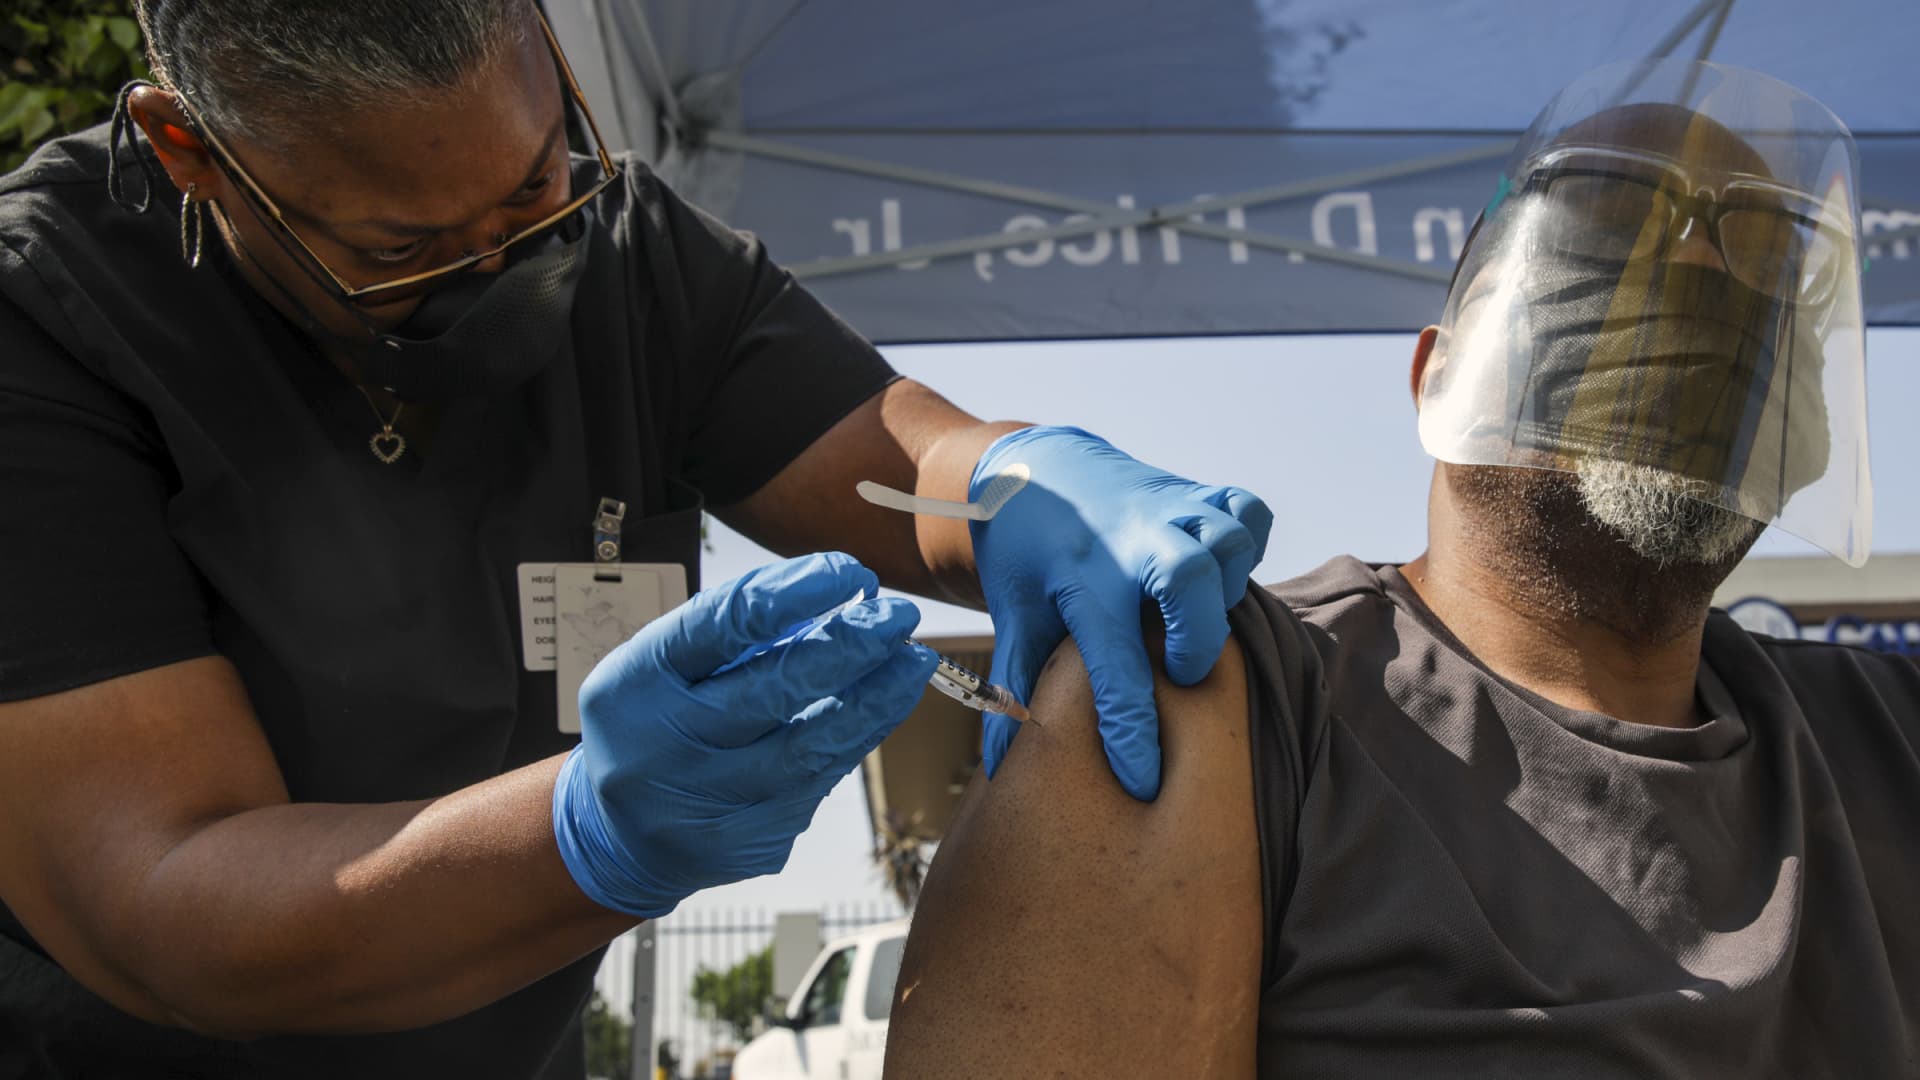 Eon Walk, left, administers a Pfizer-BioNTech vaccine to Daryl Black at a mobile COVID-19 vaccine clinic, hosted by Mothers In Action in collaboration with L.A. County Department of Public Health at Mothers in Action on Friday, July 16, 2021 in Los Angeles, CA.